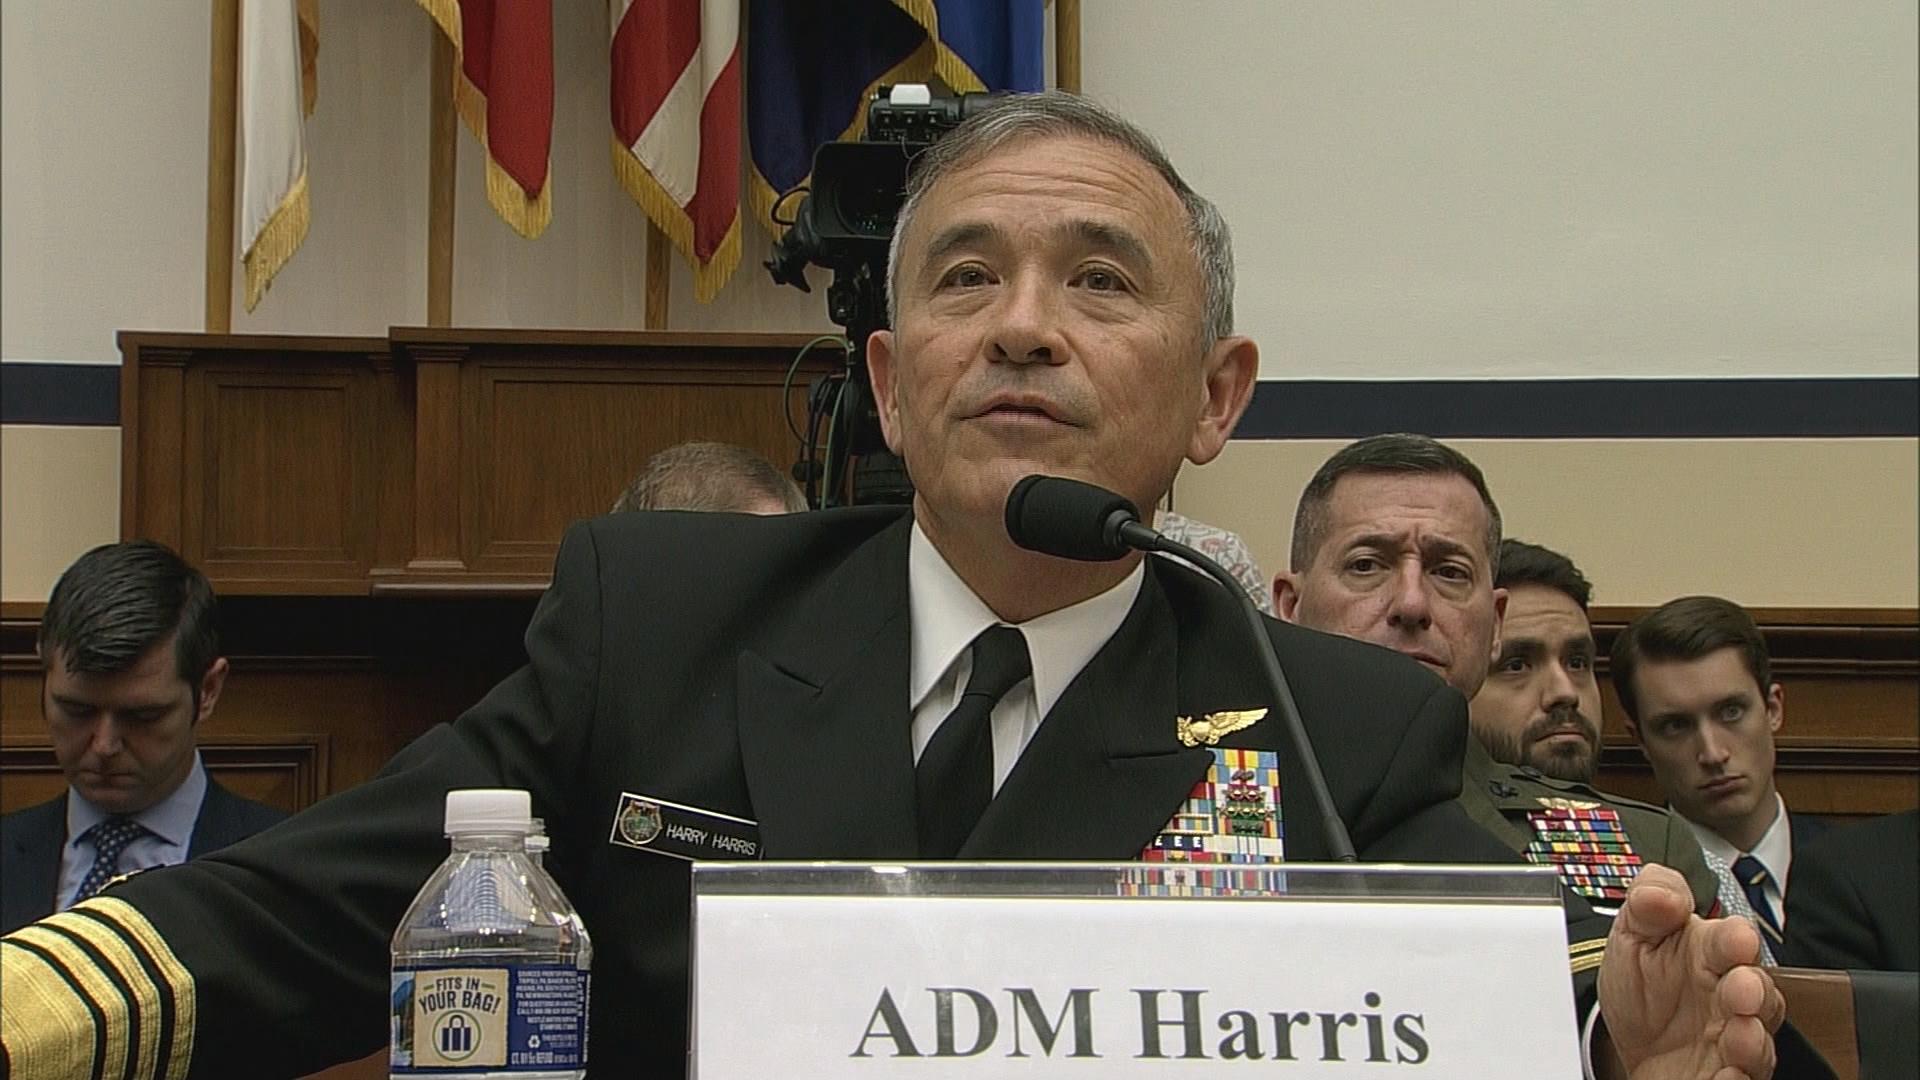 “We have to look at North Korea as if Kim Jong-un will do what he says,” said Adm. Harry Harris.